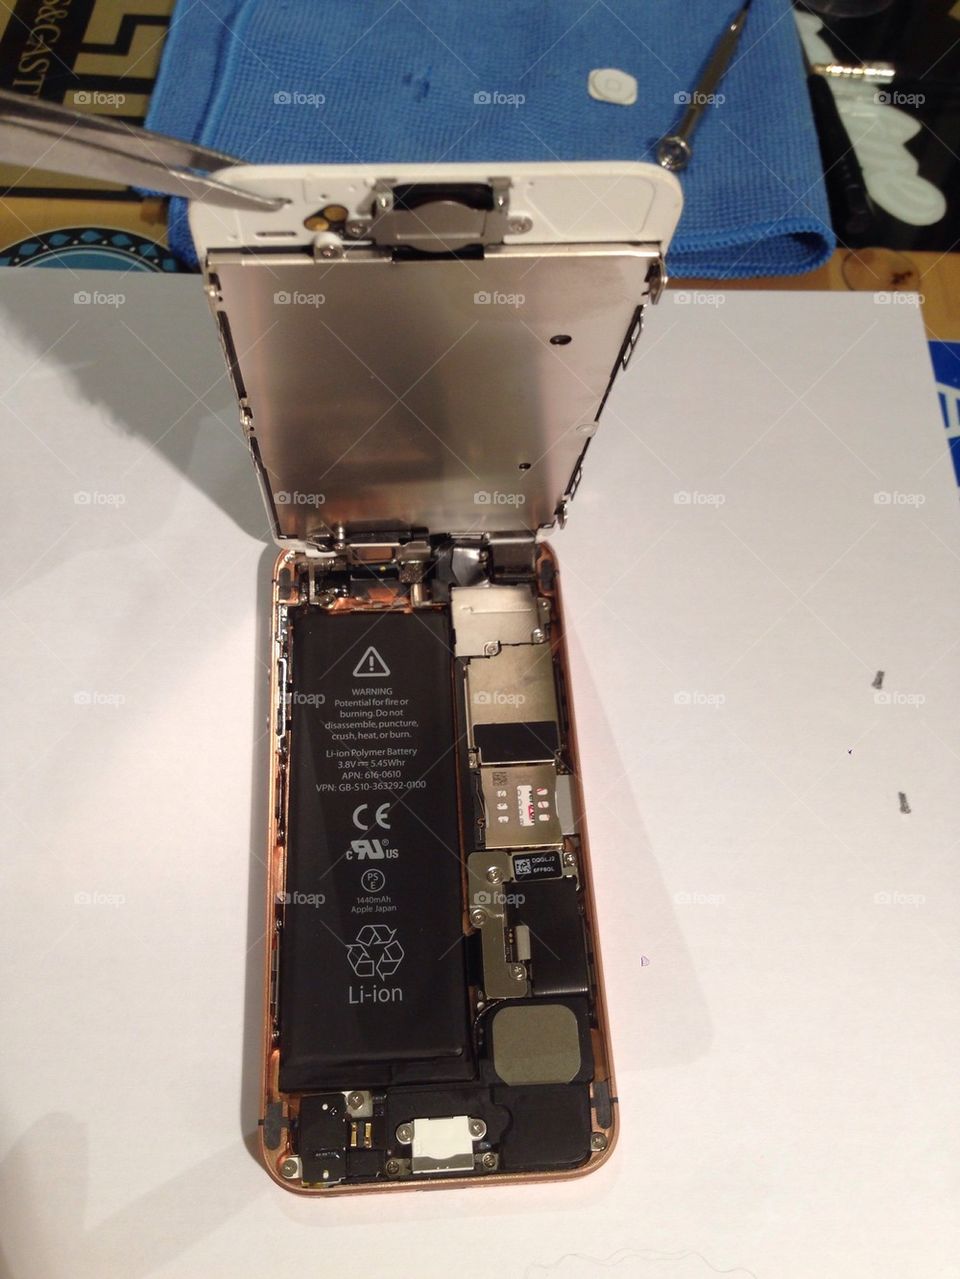 Inside of an iPhone 